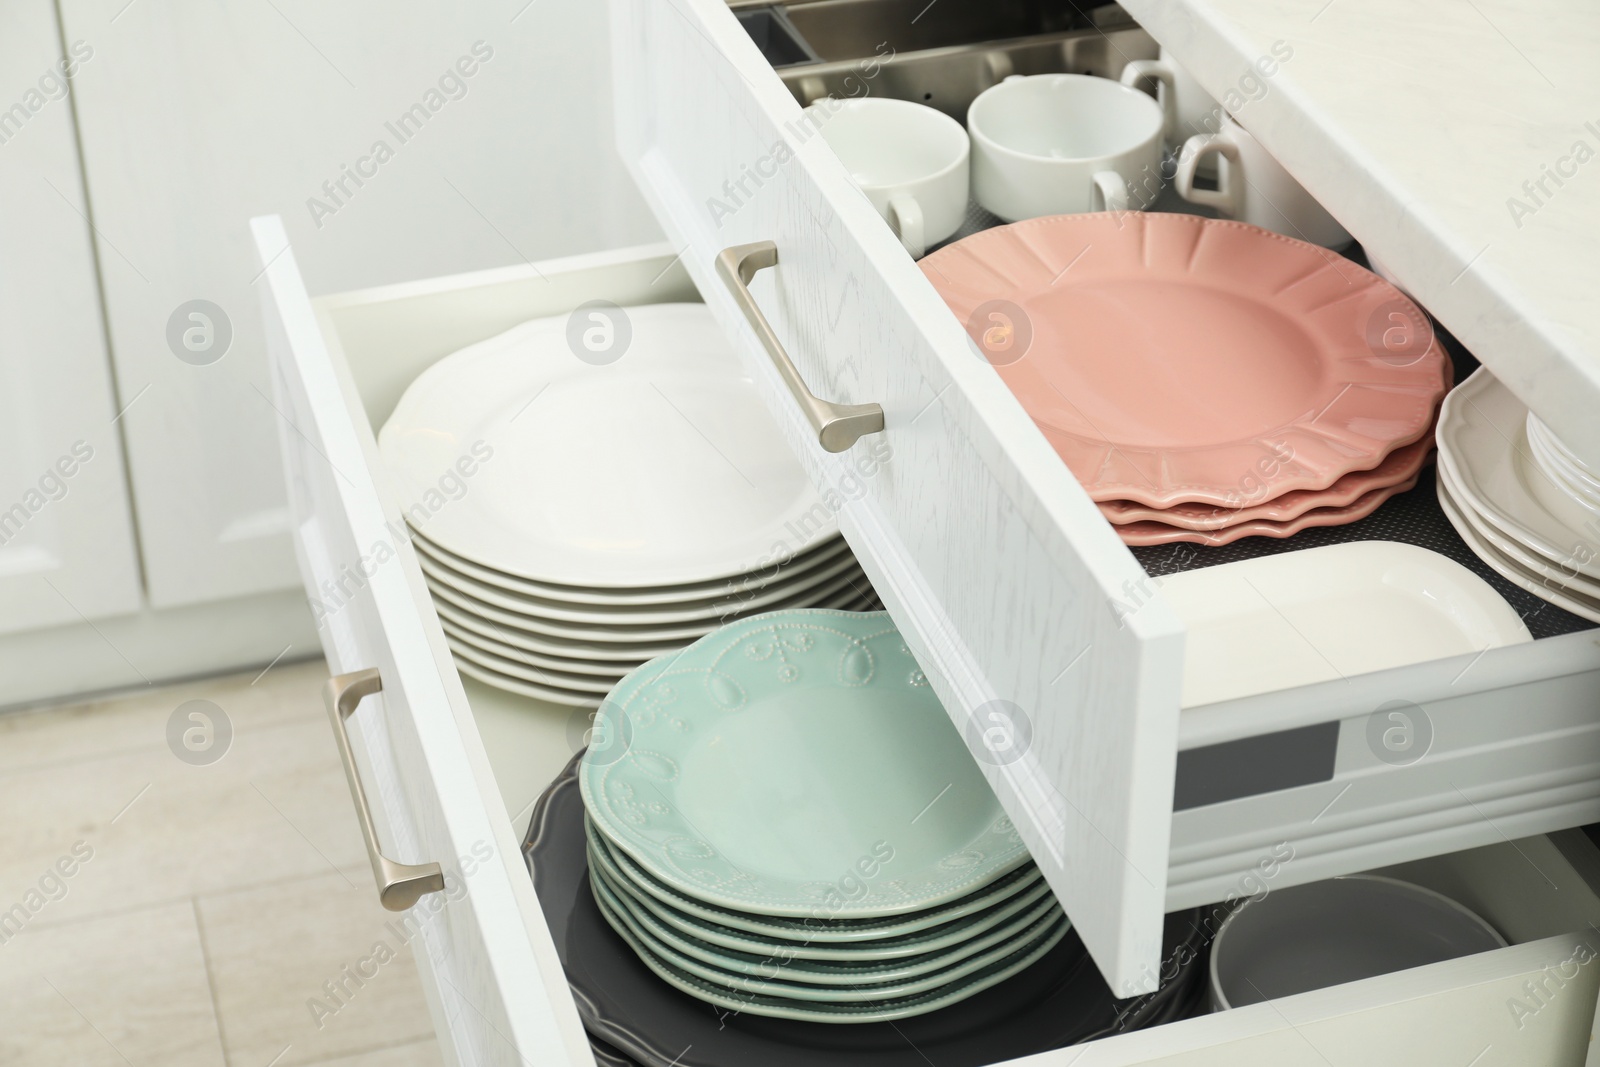 Photo of Clean plates and bowls in drawers indoors